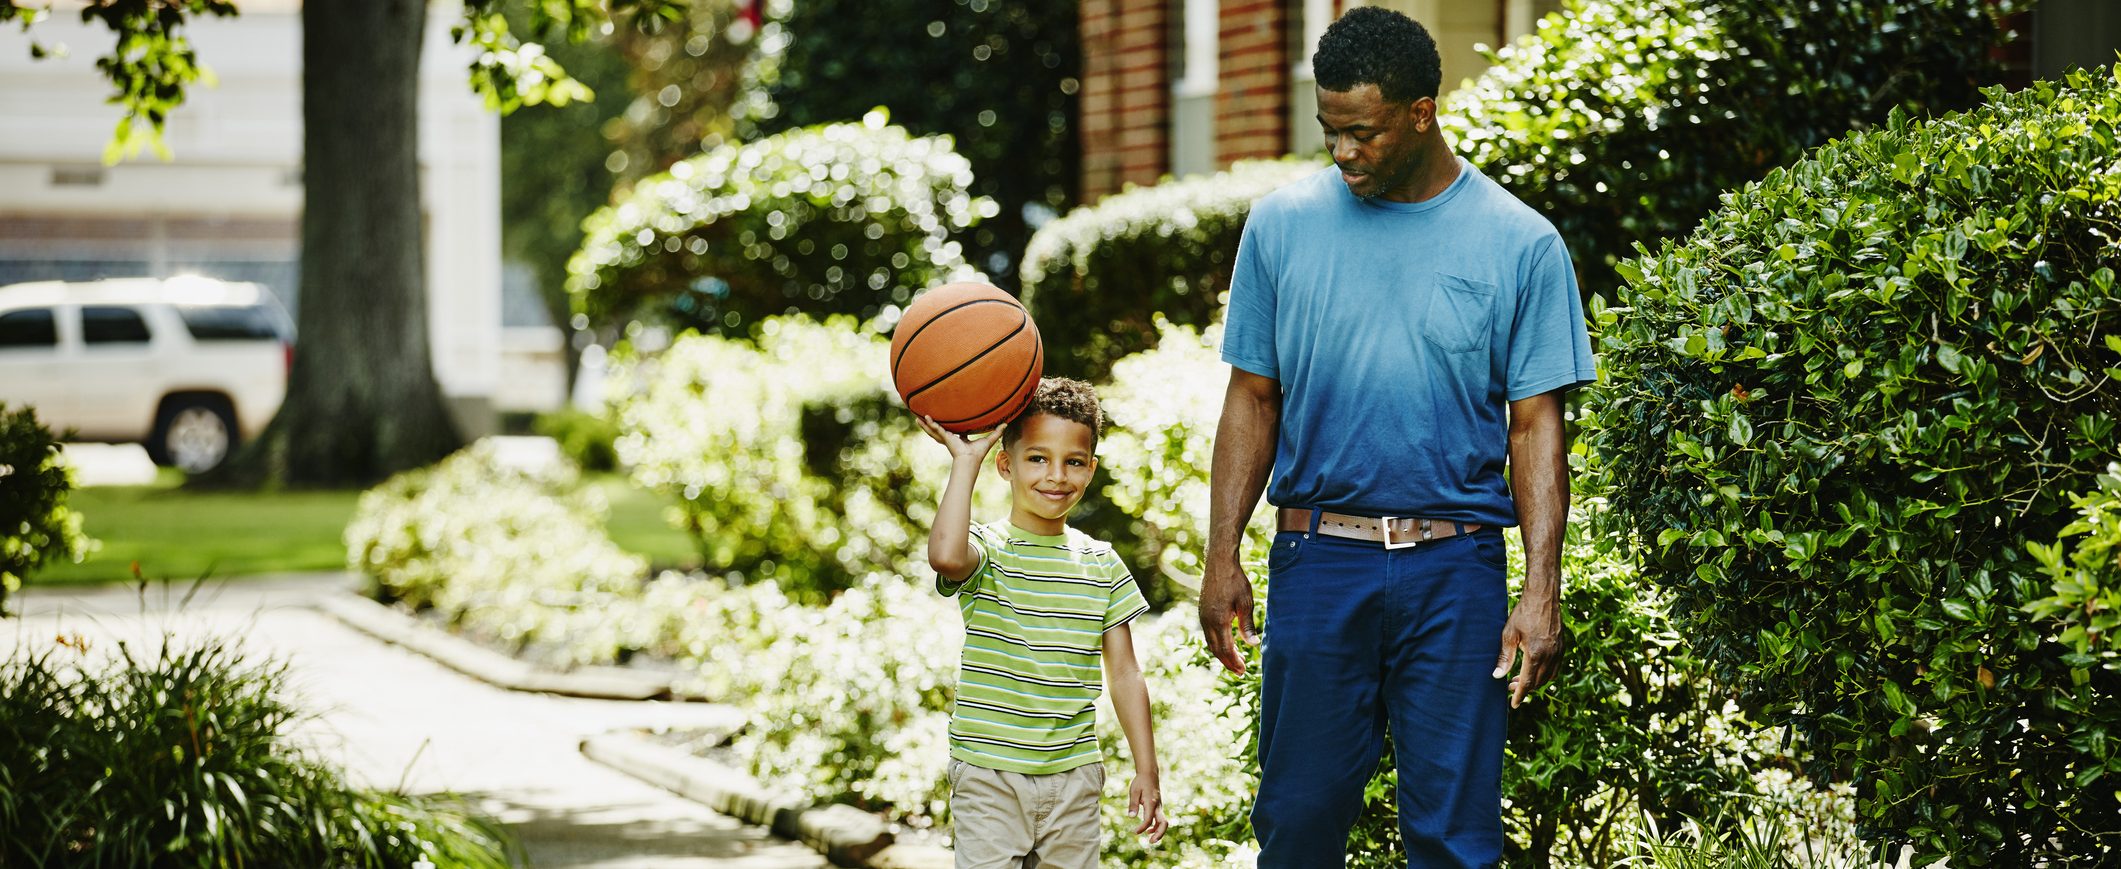 Man proudly looks at his son playing with a basketball as they walk through the neighborhood